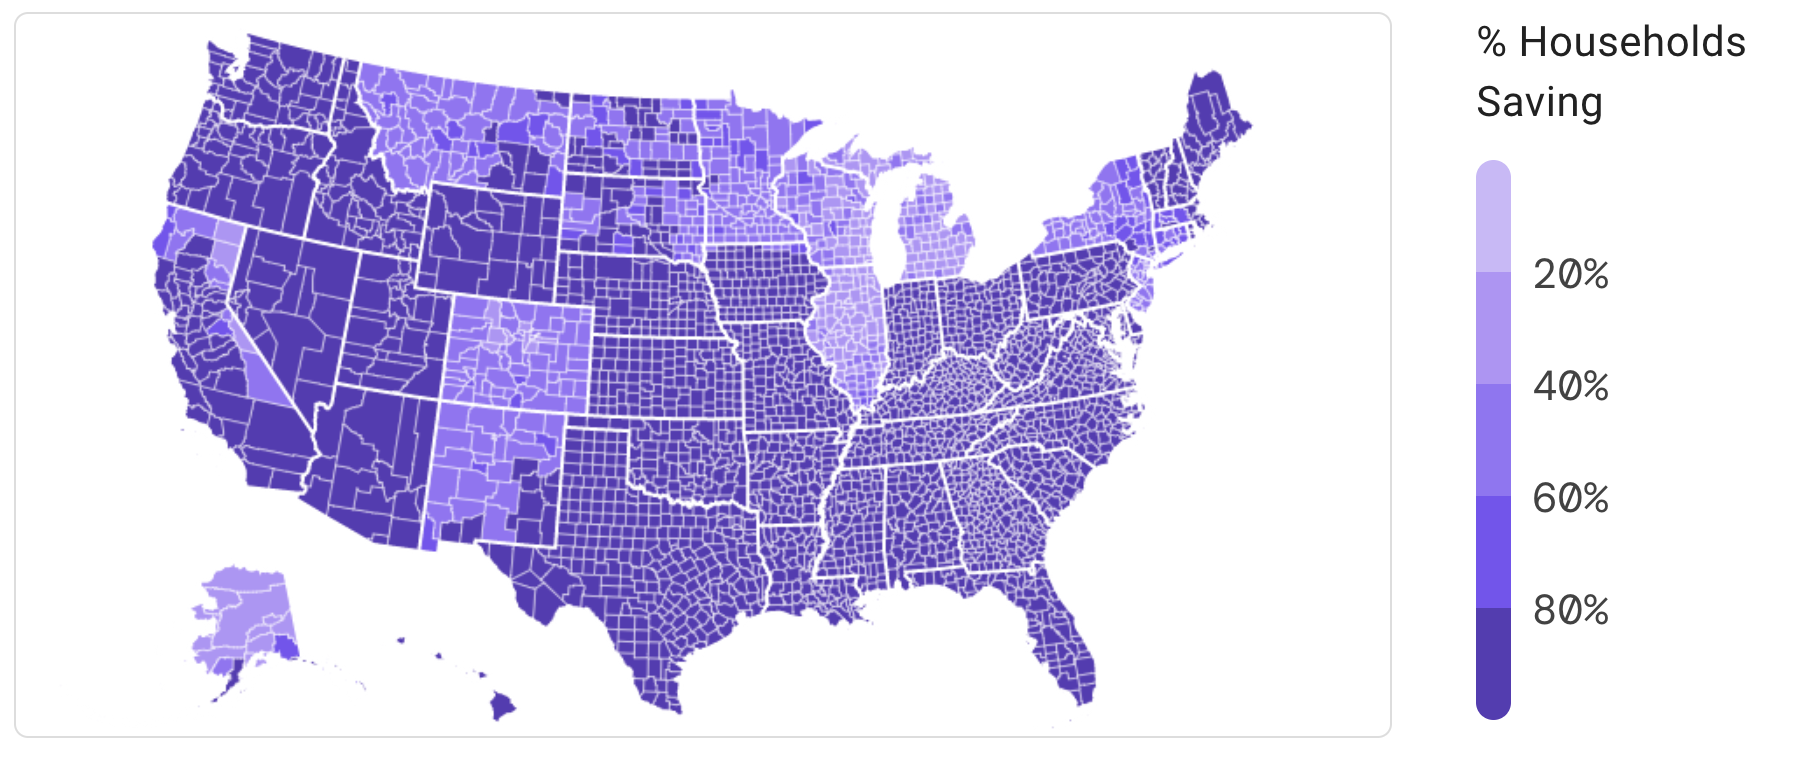 Map of the US showing that most households in counties across the nation would save on their energy bills with modern, electric appliances. In shades of purple, shows each county savings from 0 to 100%, with 100% represented by the darker purple. 